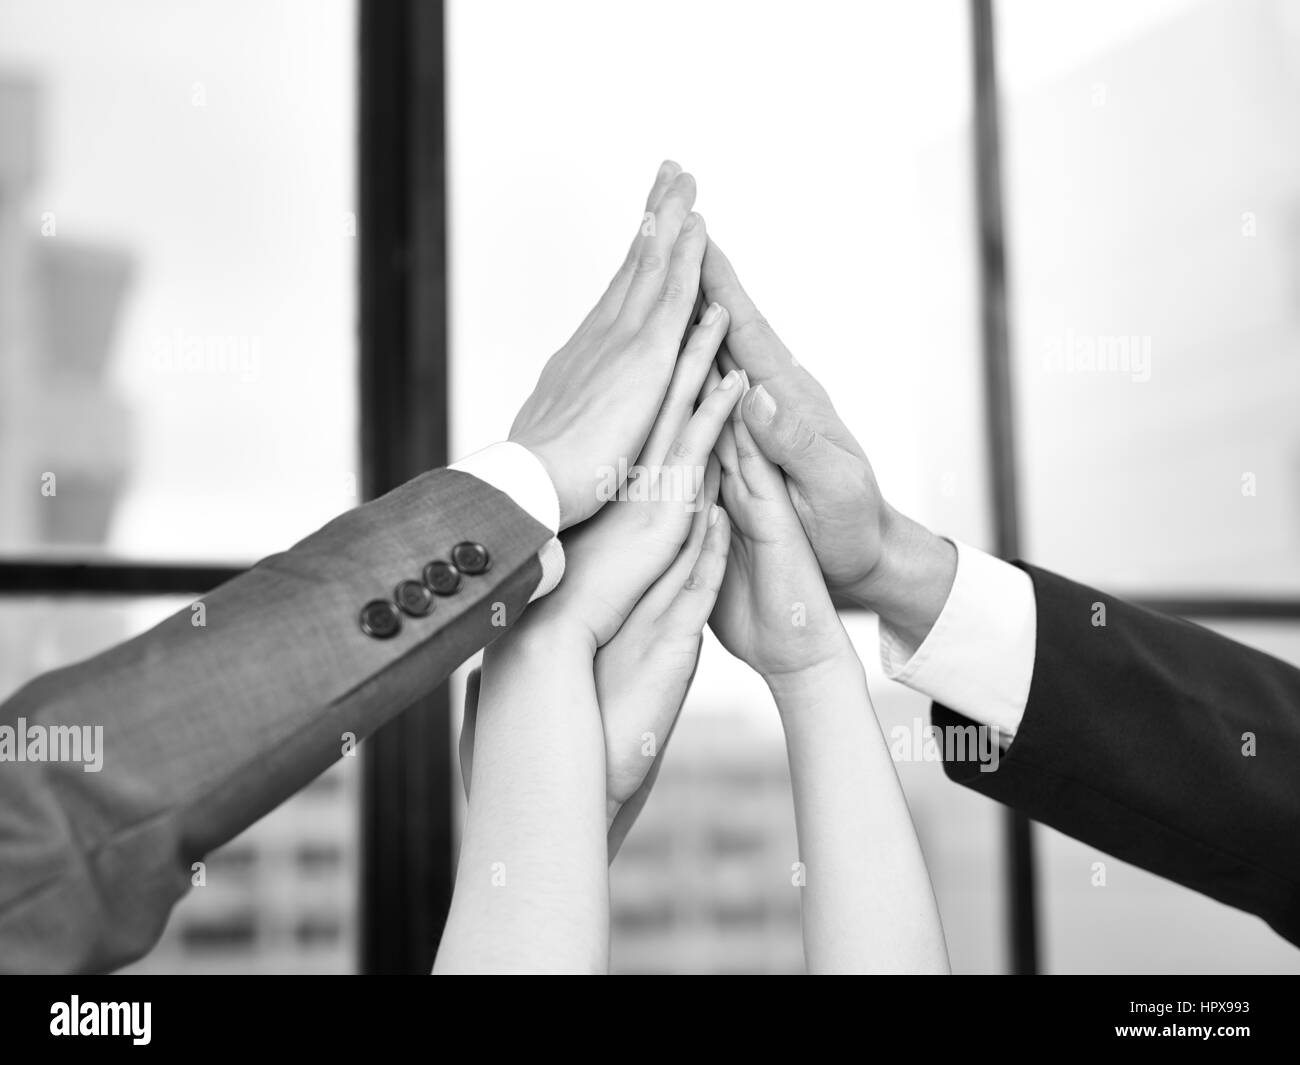 businesspeople putting hands together to form a pyramid in a display of team spirit and determination, black and white. Stock Photo